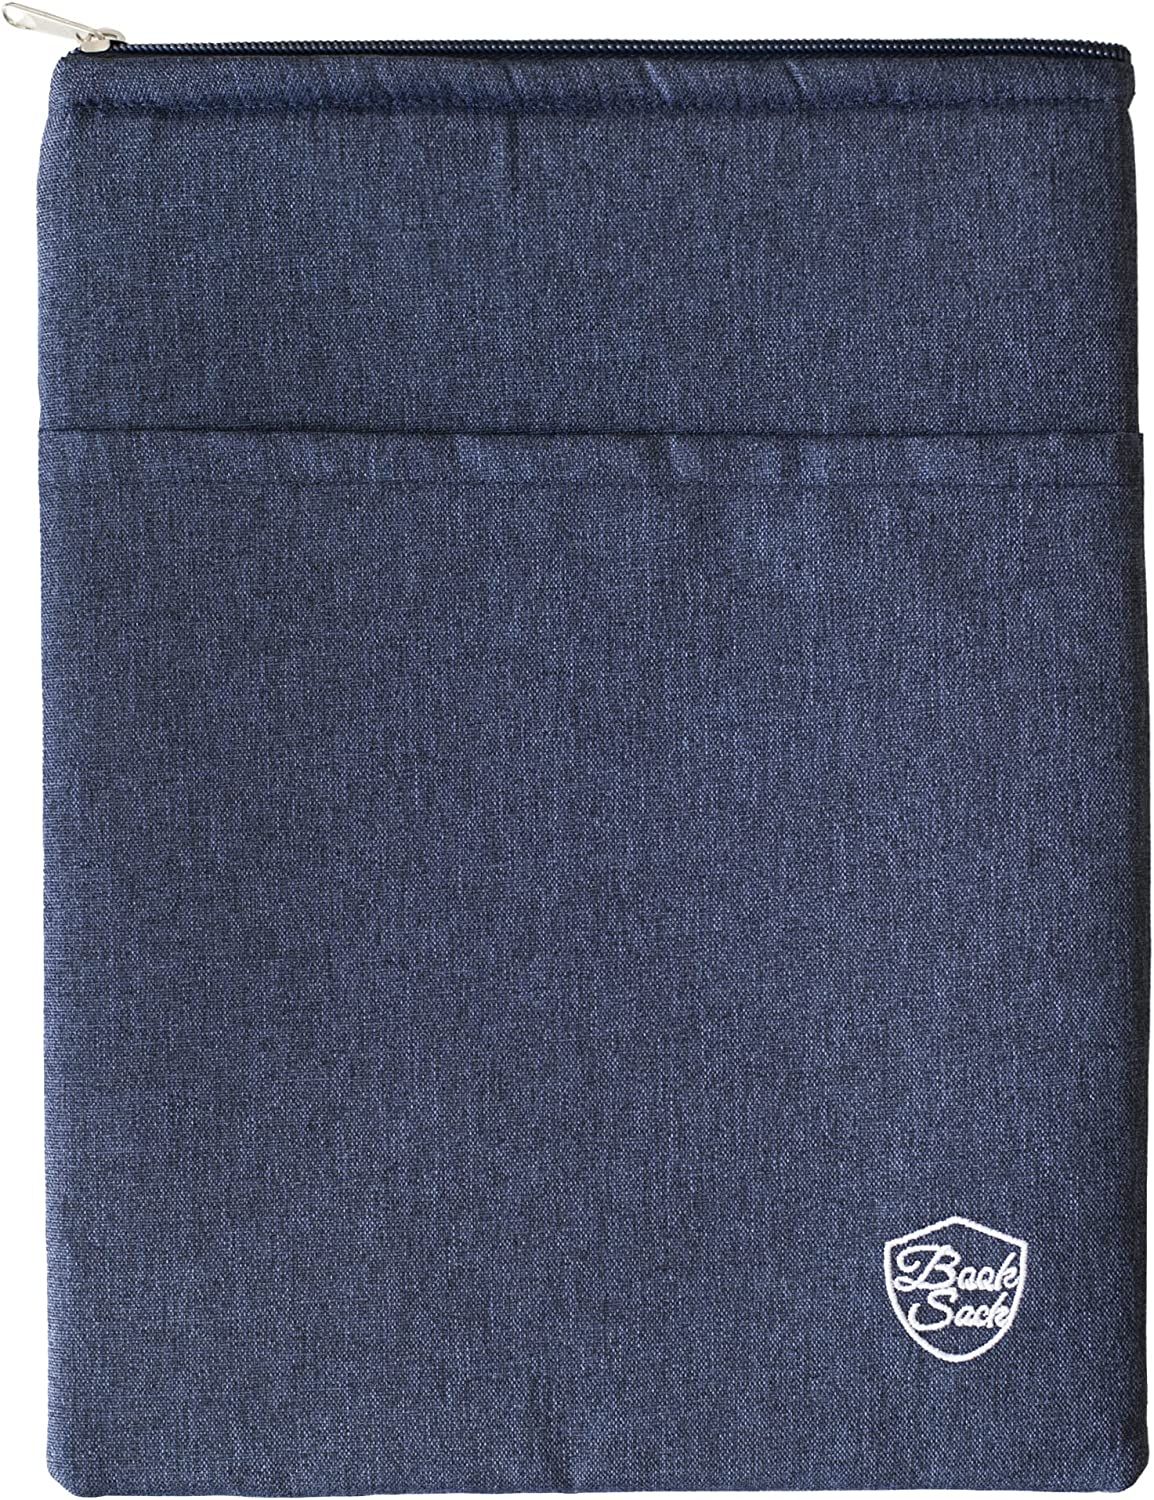 denim colored book sleeve with zippered top